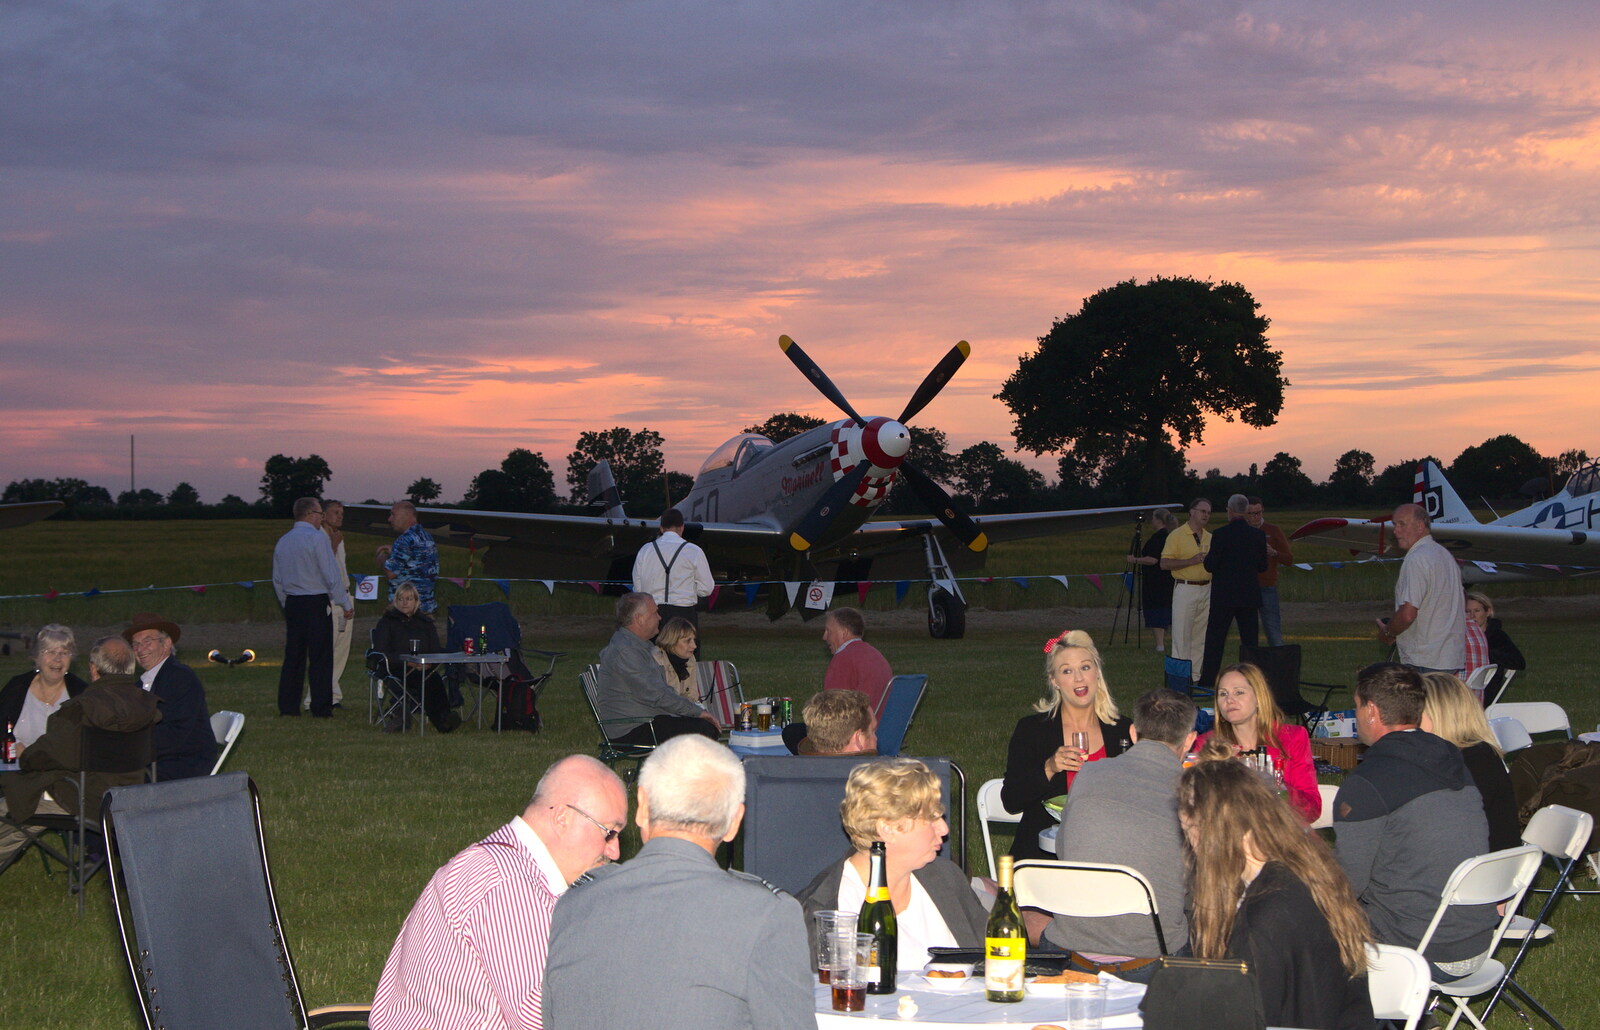 Picnicers in the evening from "Our Little Friends" Warbirds Hangar Dance, Hardwick, Norfolk - 9th July 2016